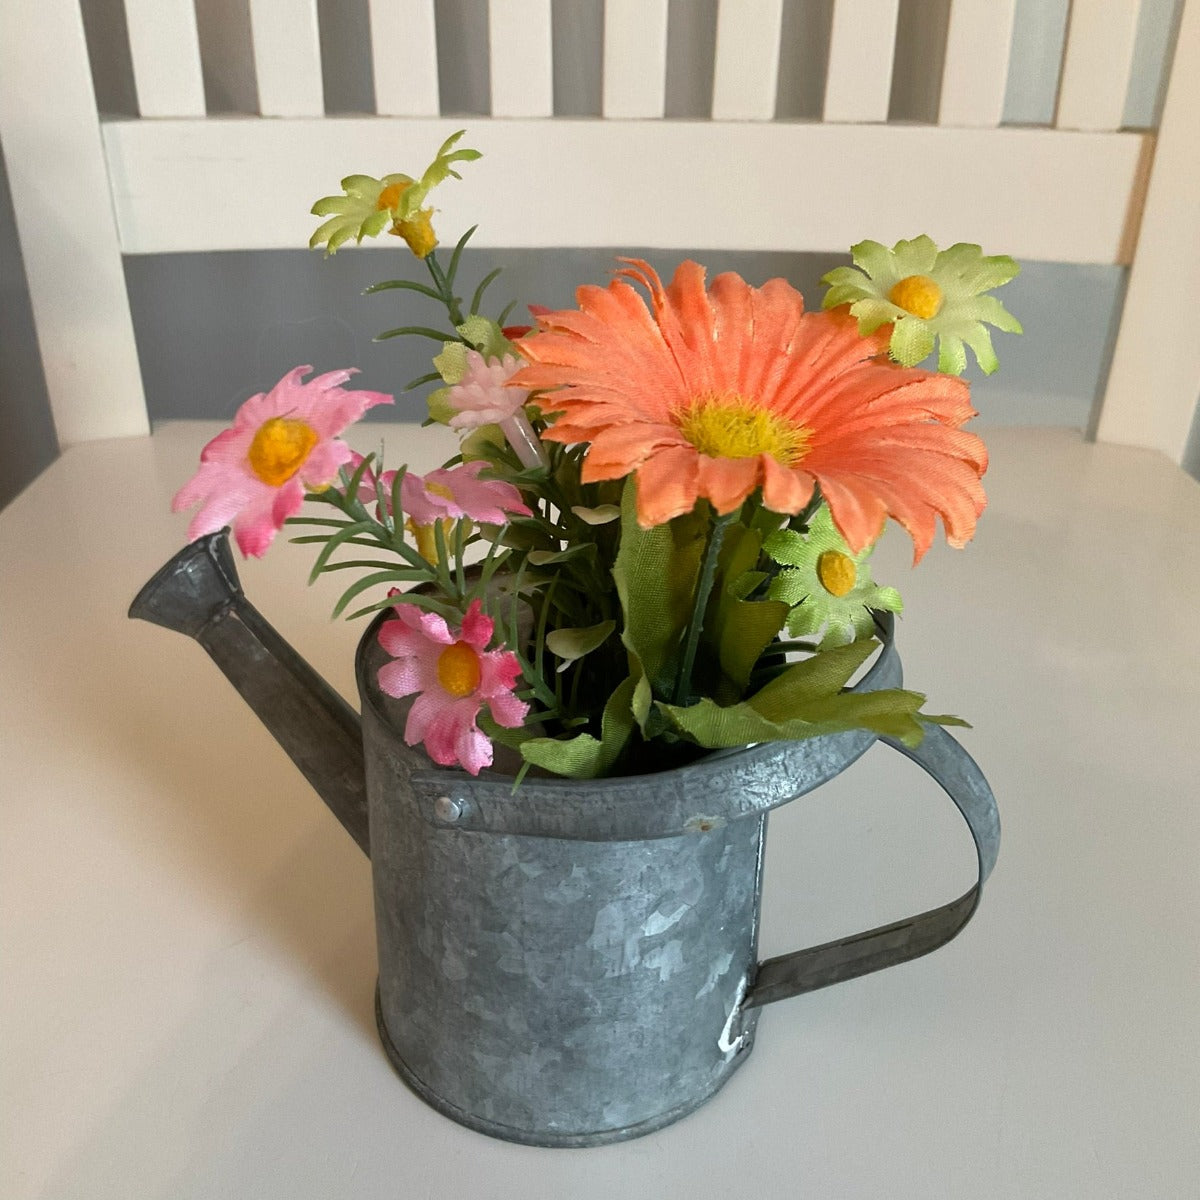 Mini Galvanized Watering Can with Flowers